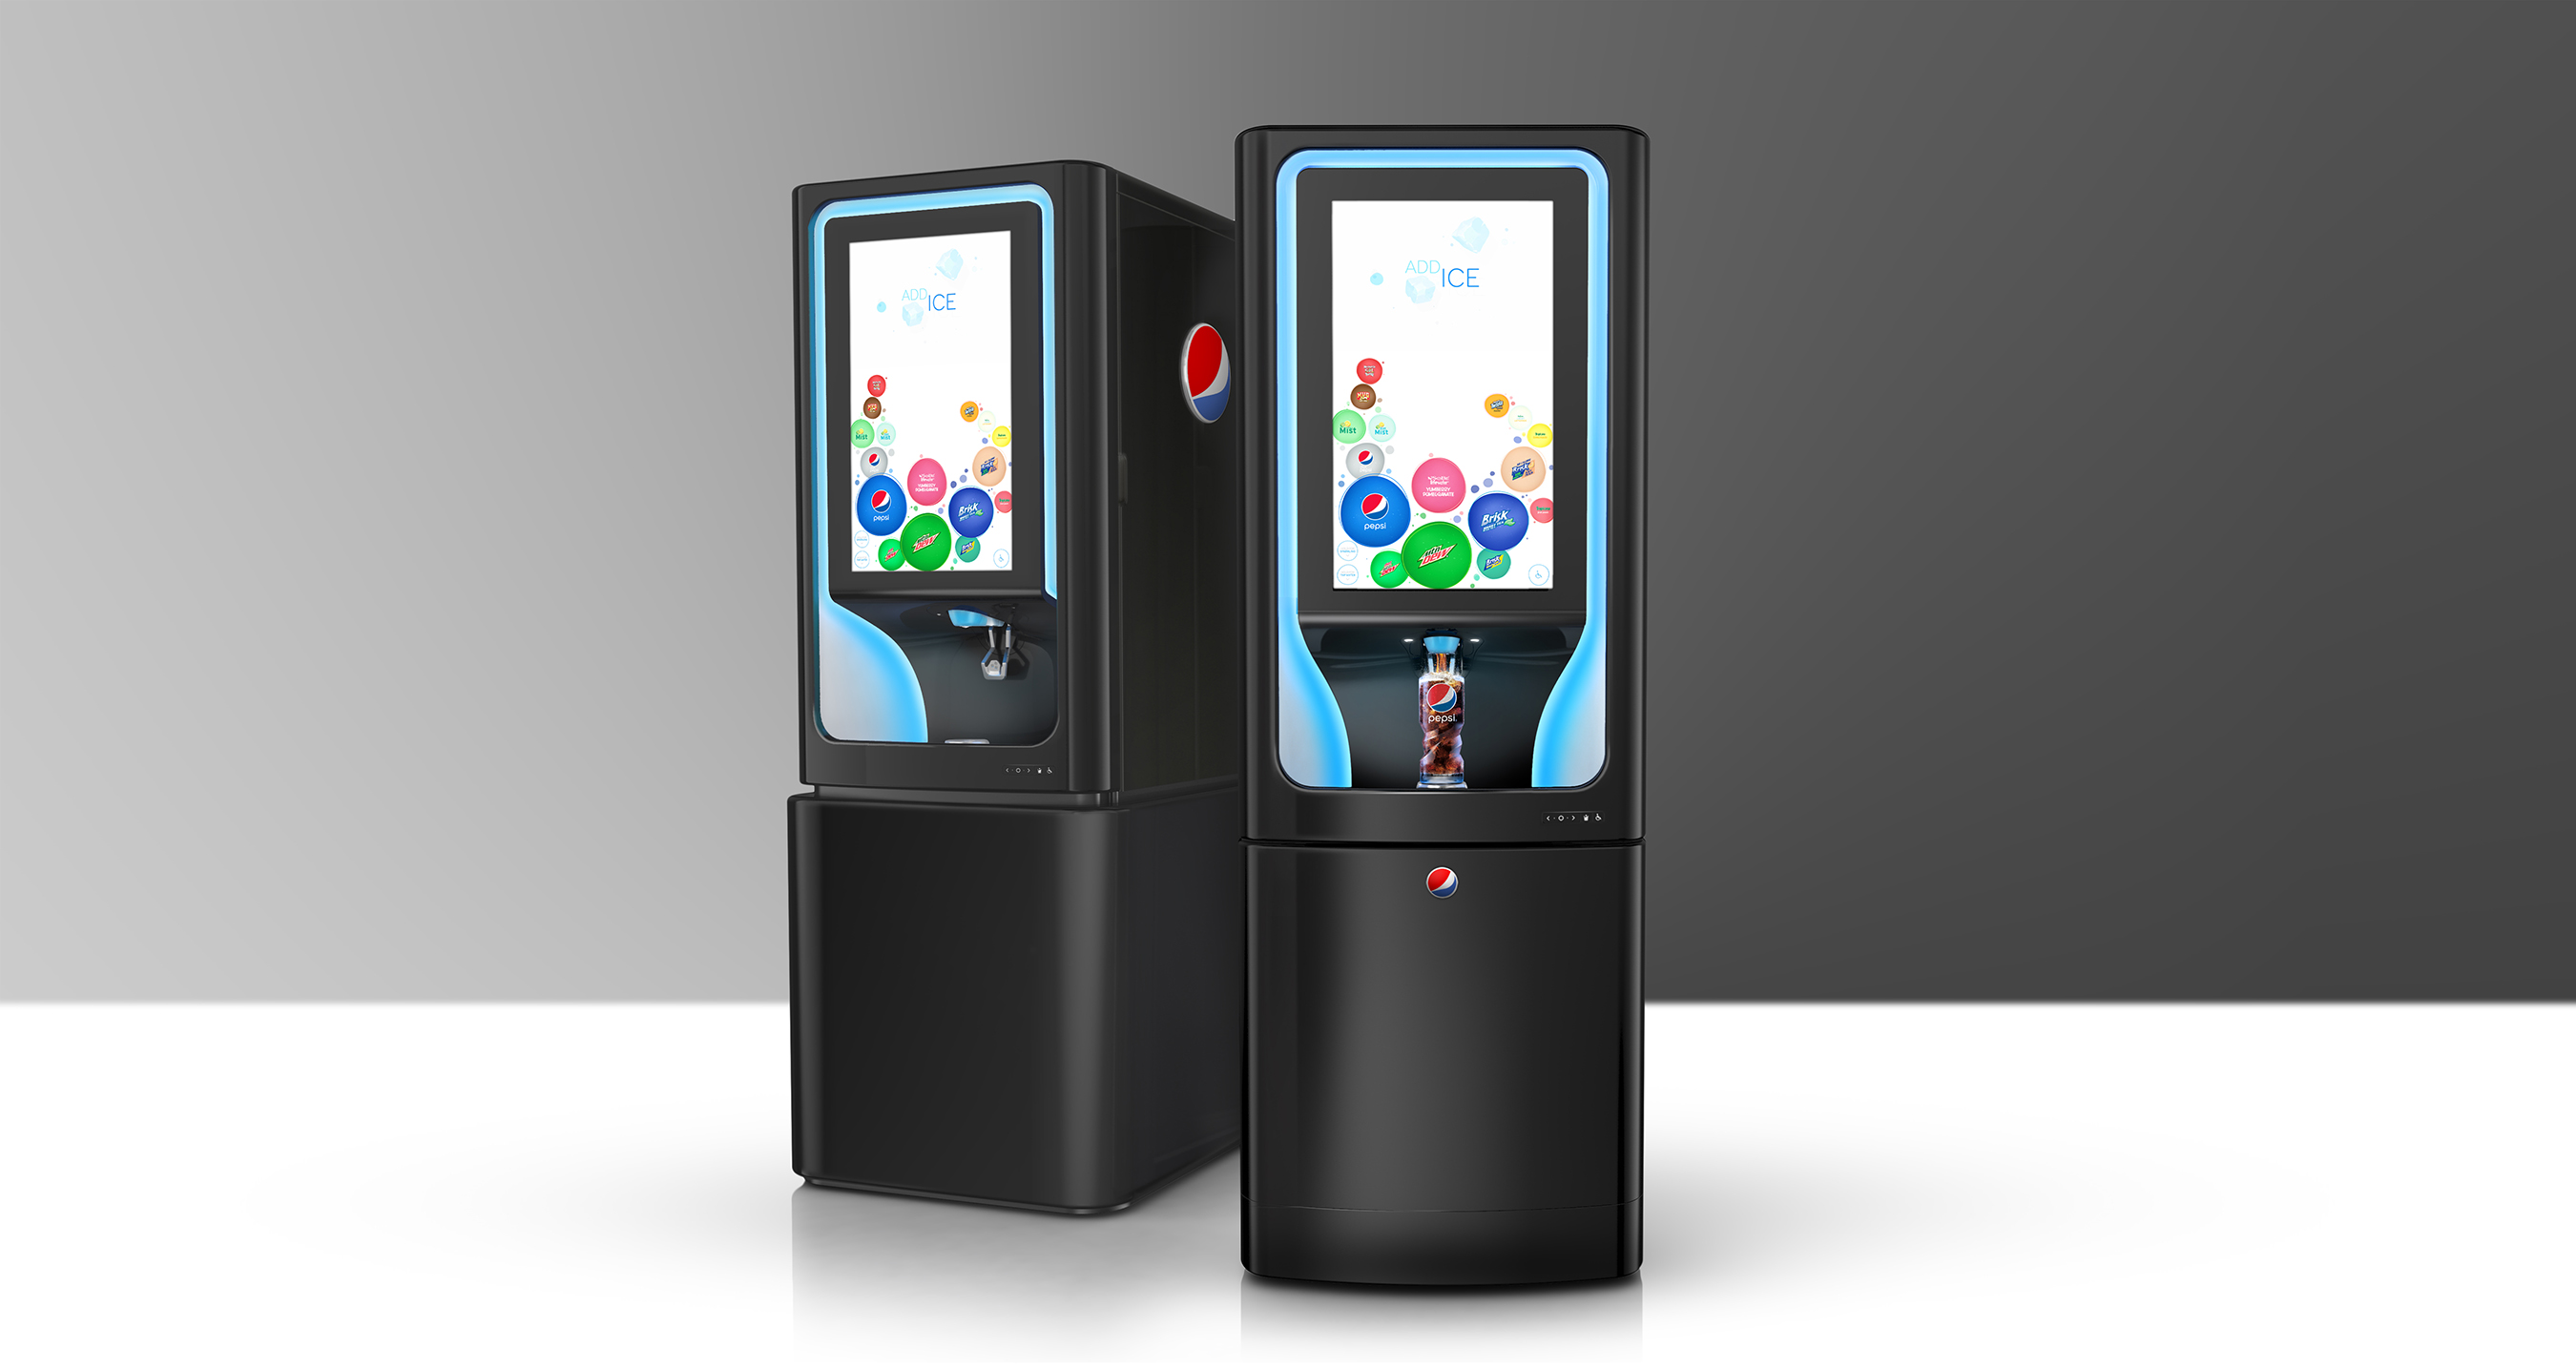 Pepsi Spire, a state-of-the-art beverage dispensing fountain, puts hundreds of drink combinations at people’s fingertips and can pour up to 3 flavor shots simultaneously with any featured beverage.